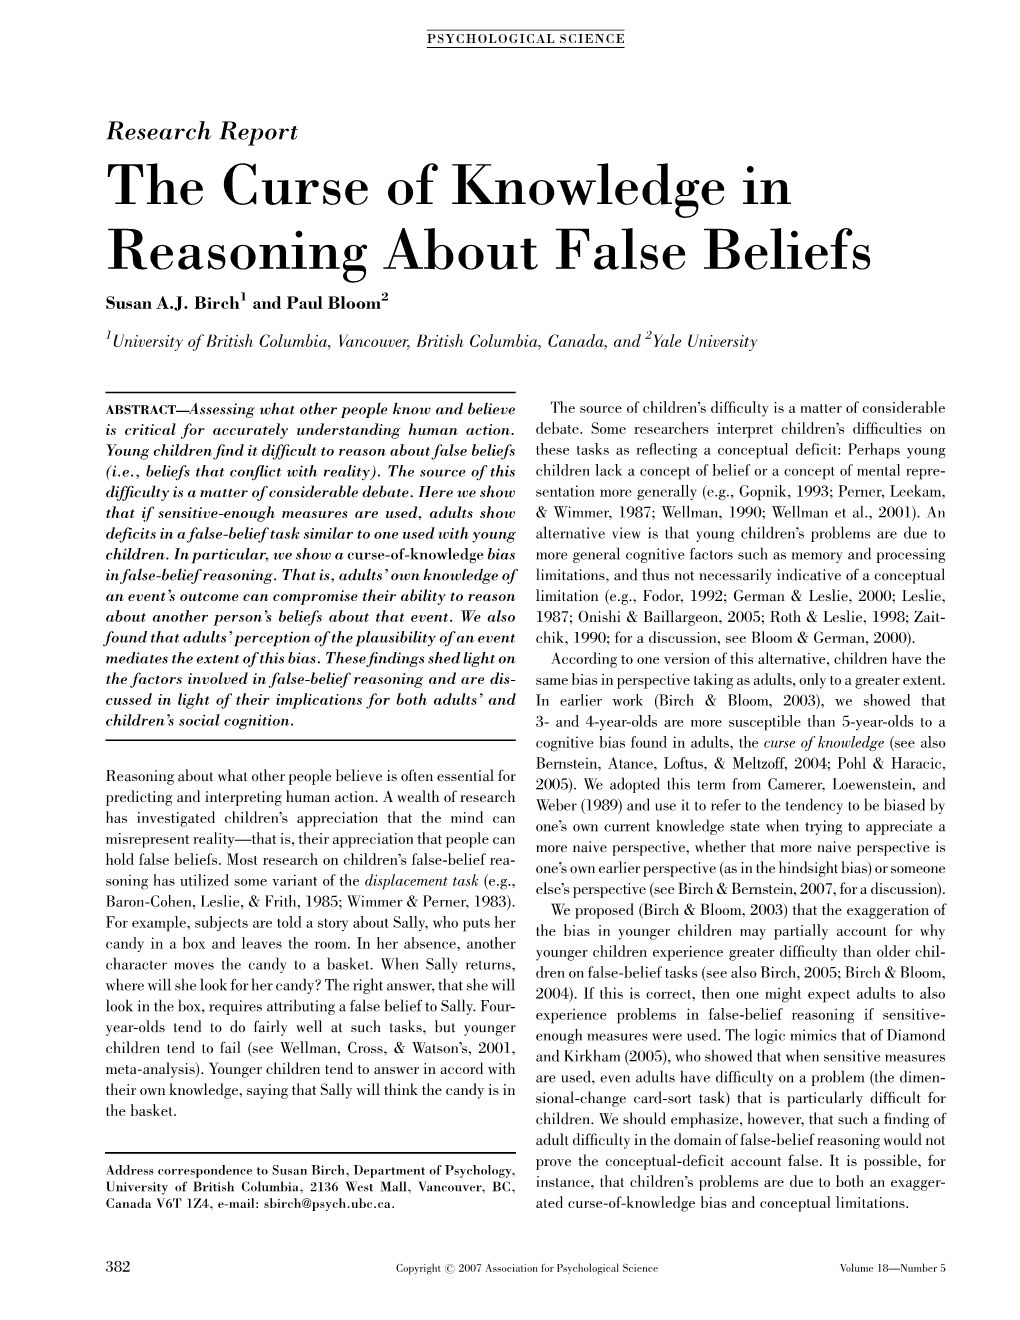 The Curse of Knowledge in Reasoning About False Beliefs Susan A.J